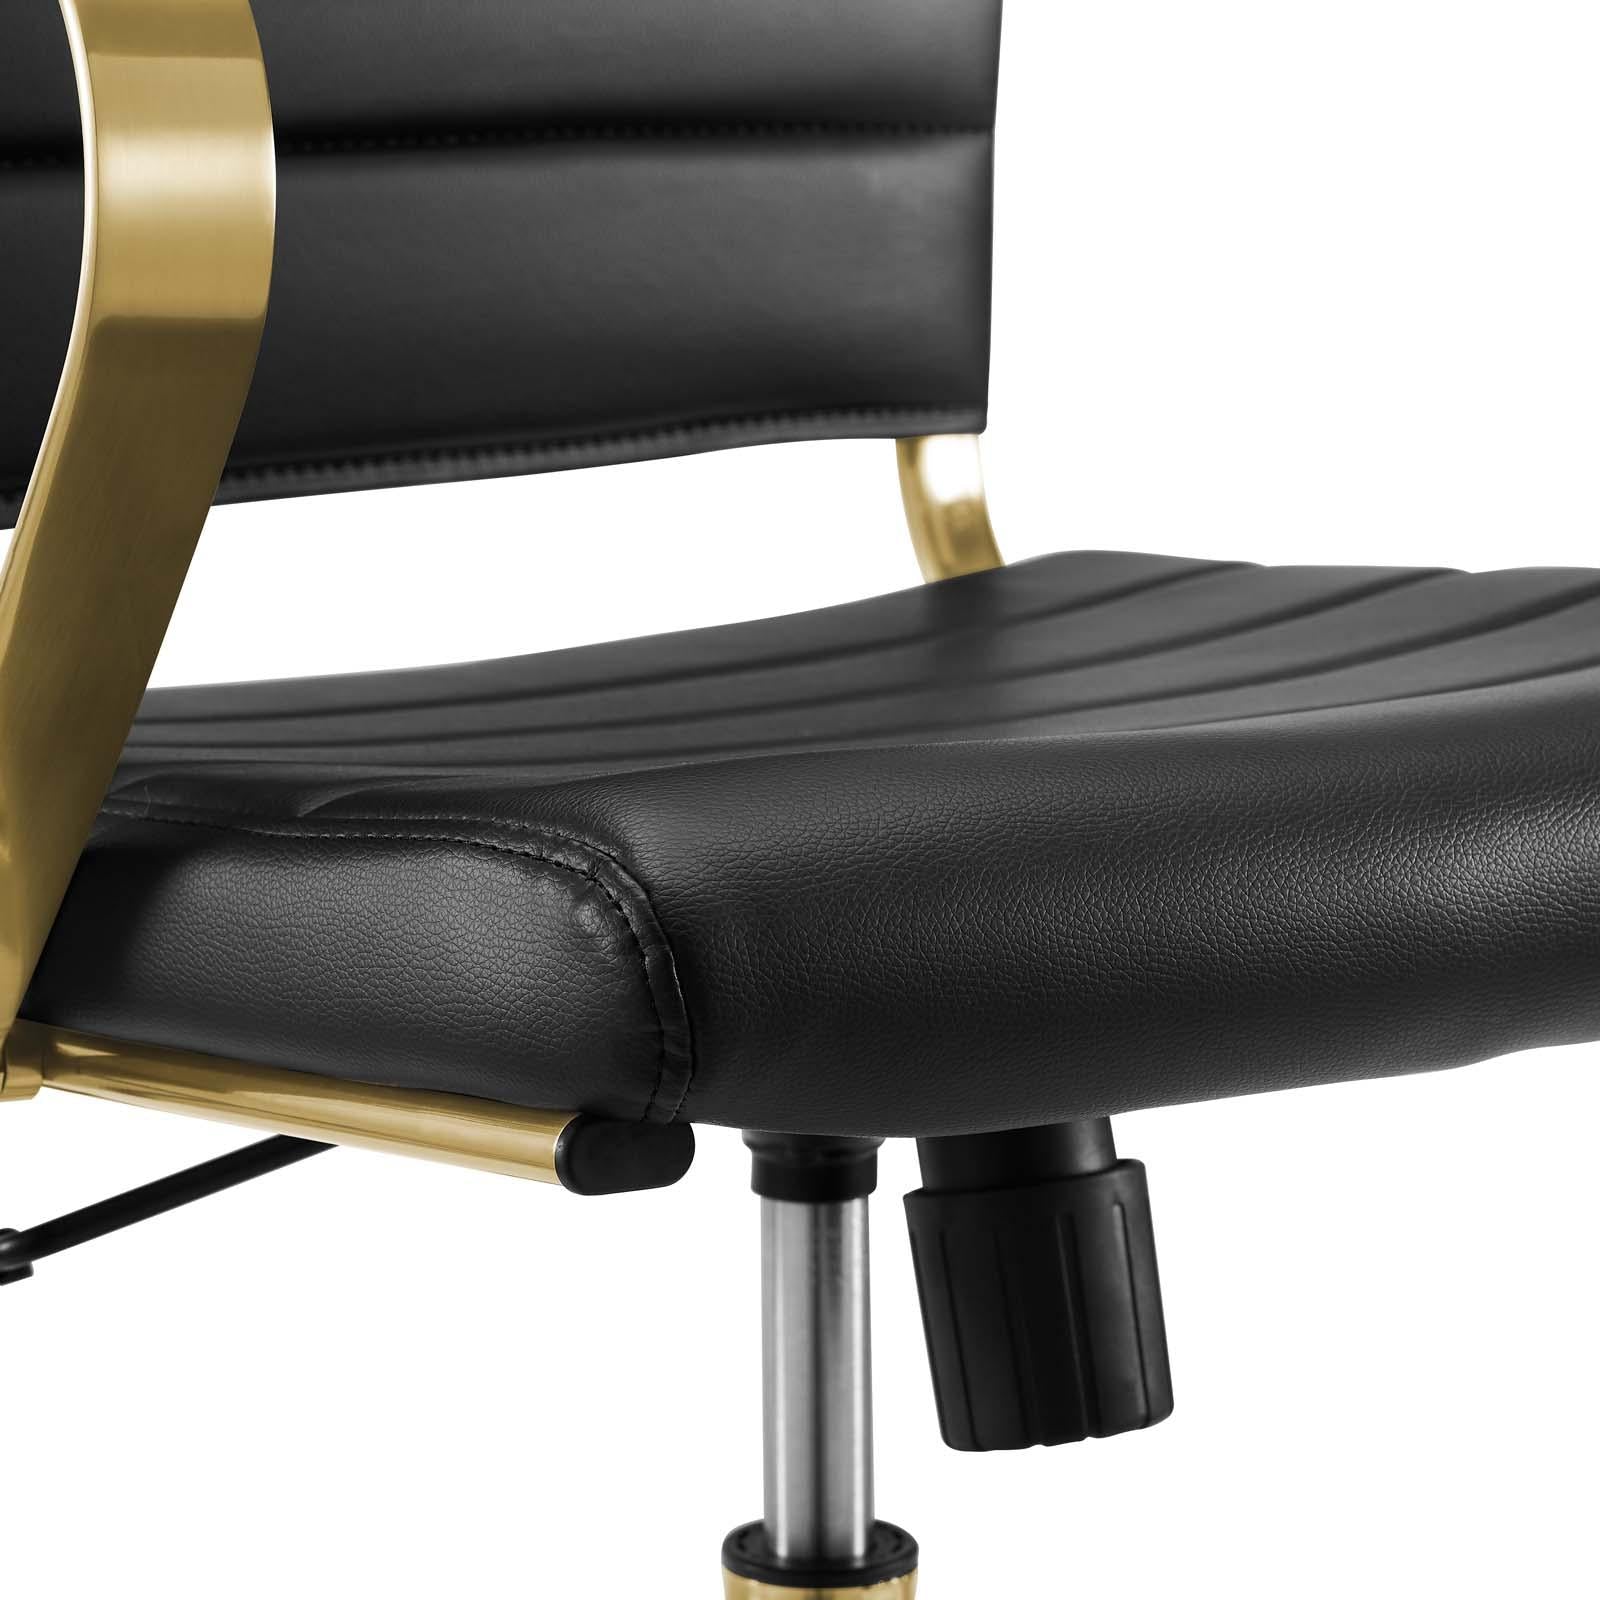 Modway Furniture Modern Jive Gold Stainless Steel Midback Office Chair - EEI-3418